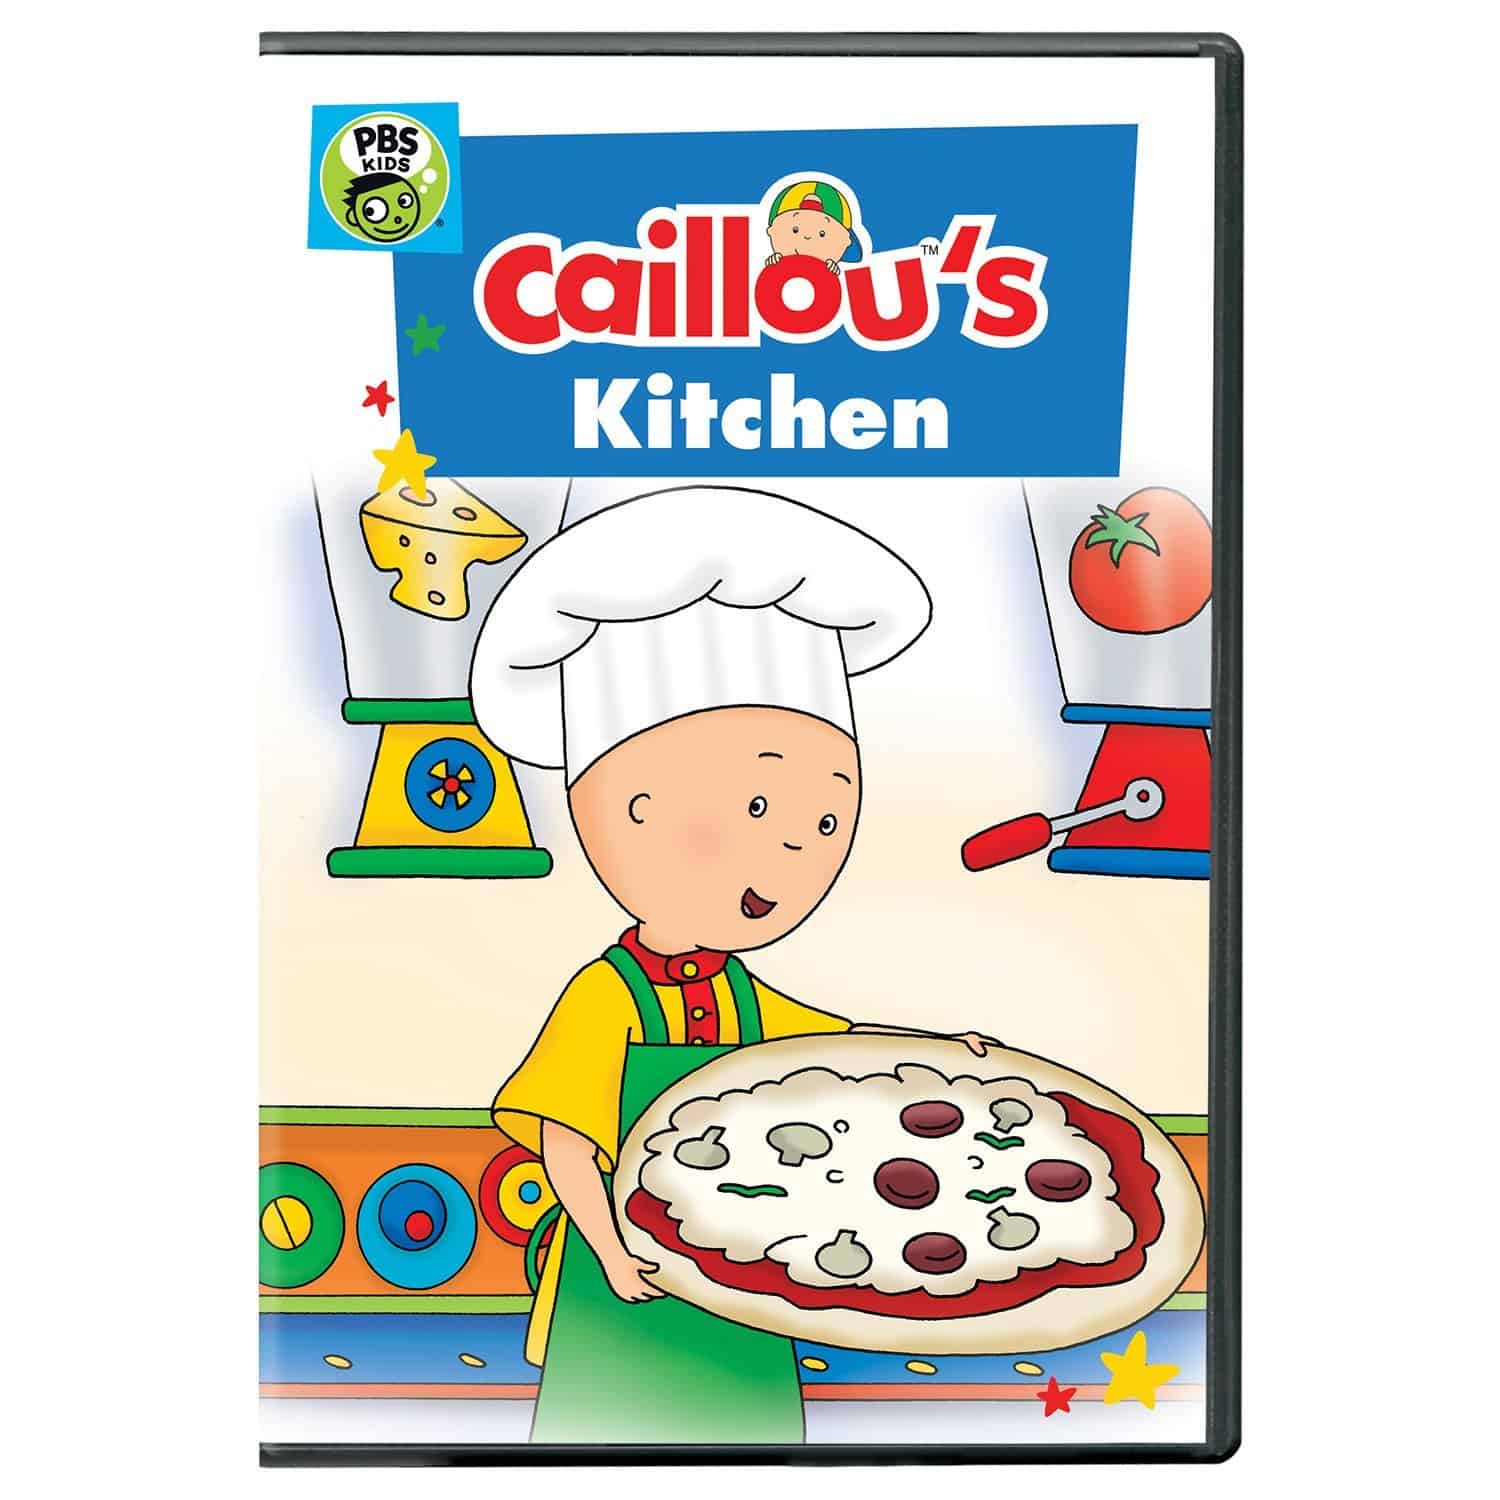 If your child enjoys cooking with you in the kitchen or playing in their own play kitchen, they will want to watch Caillou's Kitchen on DVD!